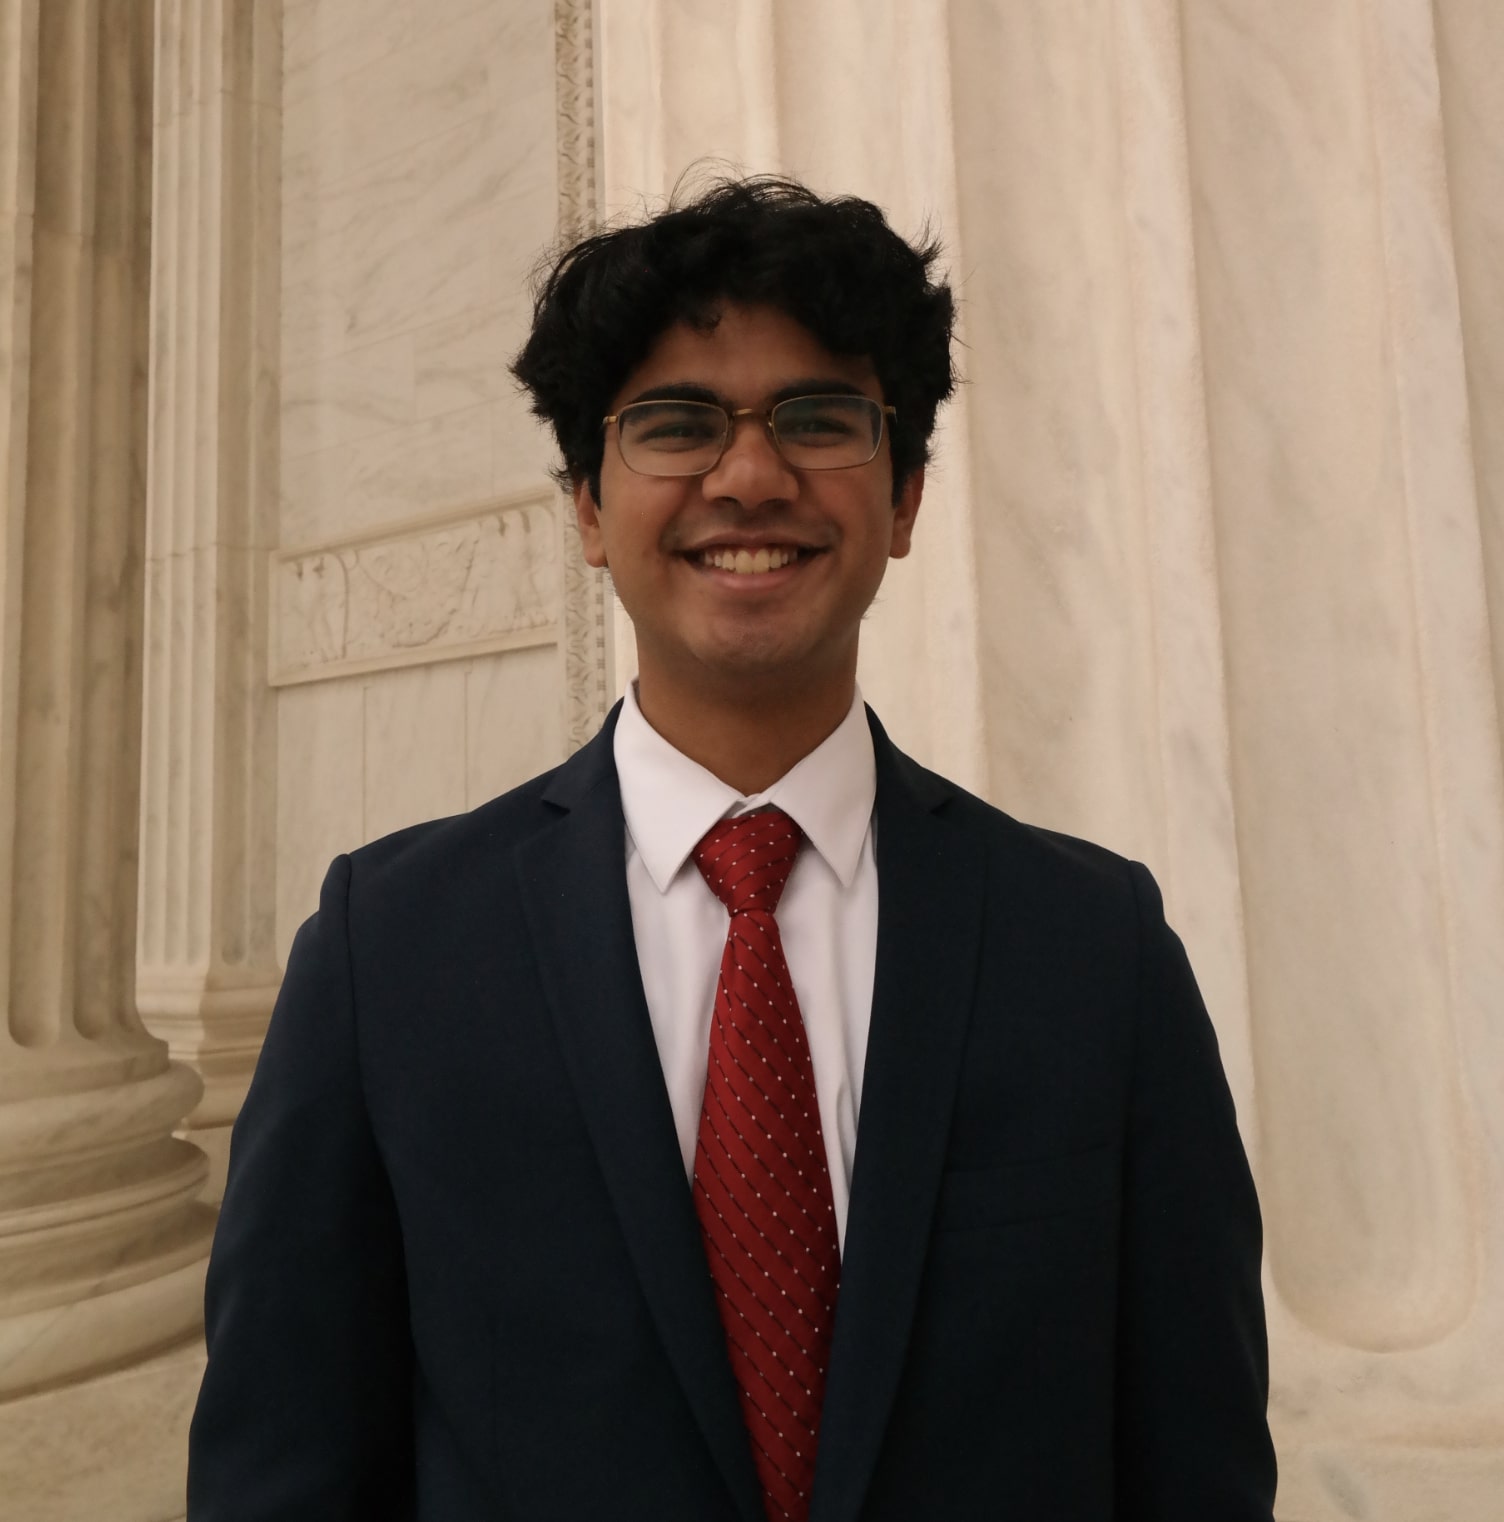 Ani, a young Indian man wearing a blue suit, smiles at the camera.